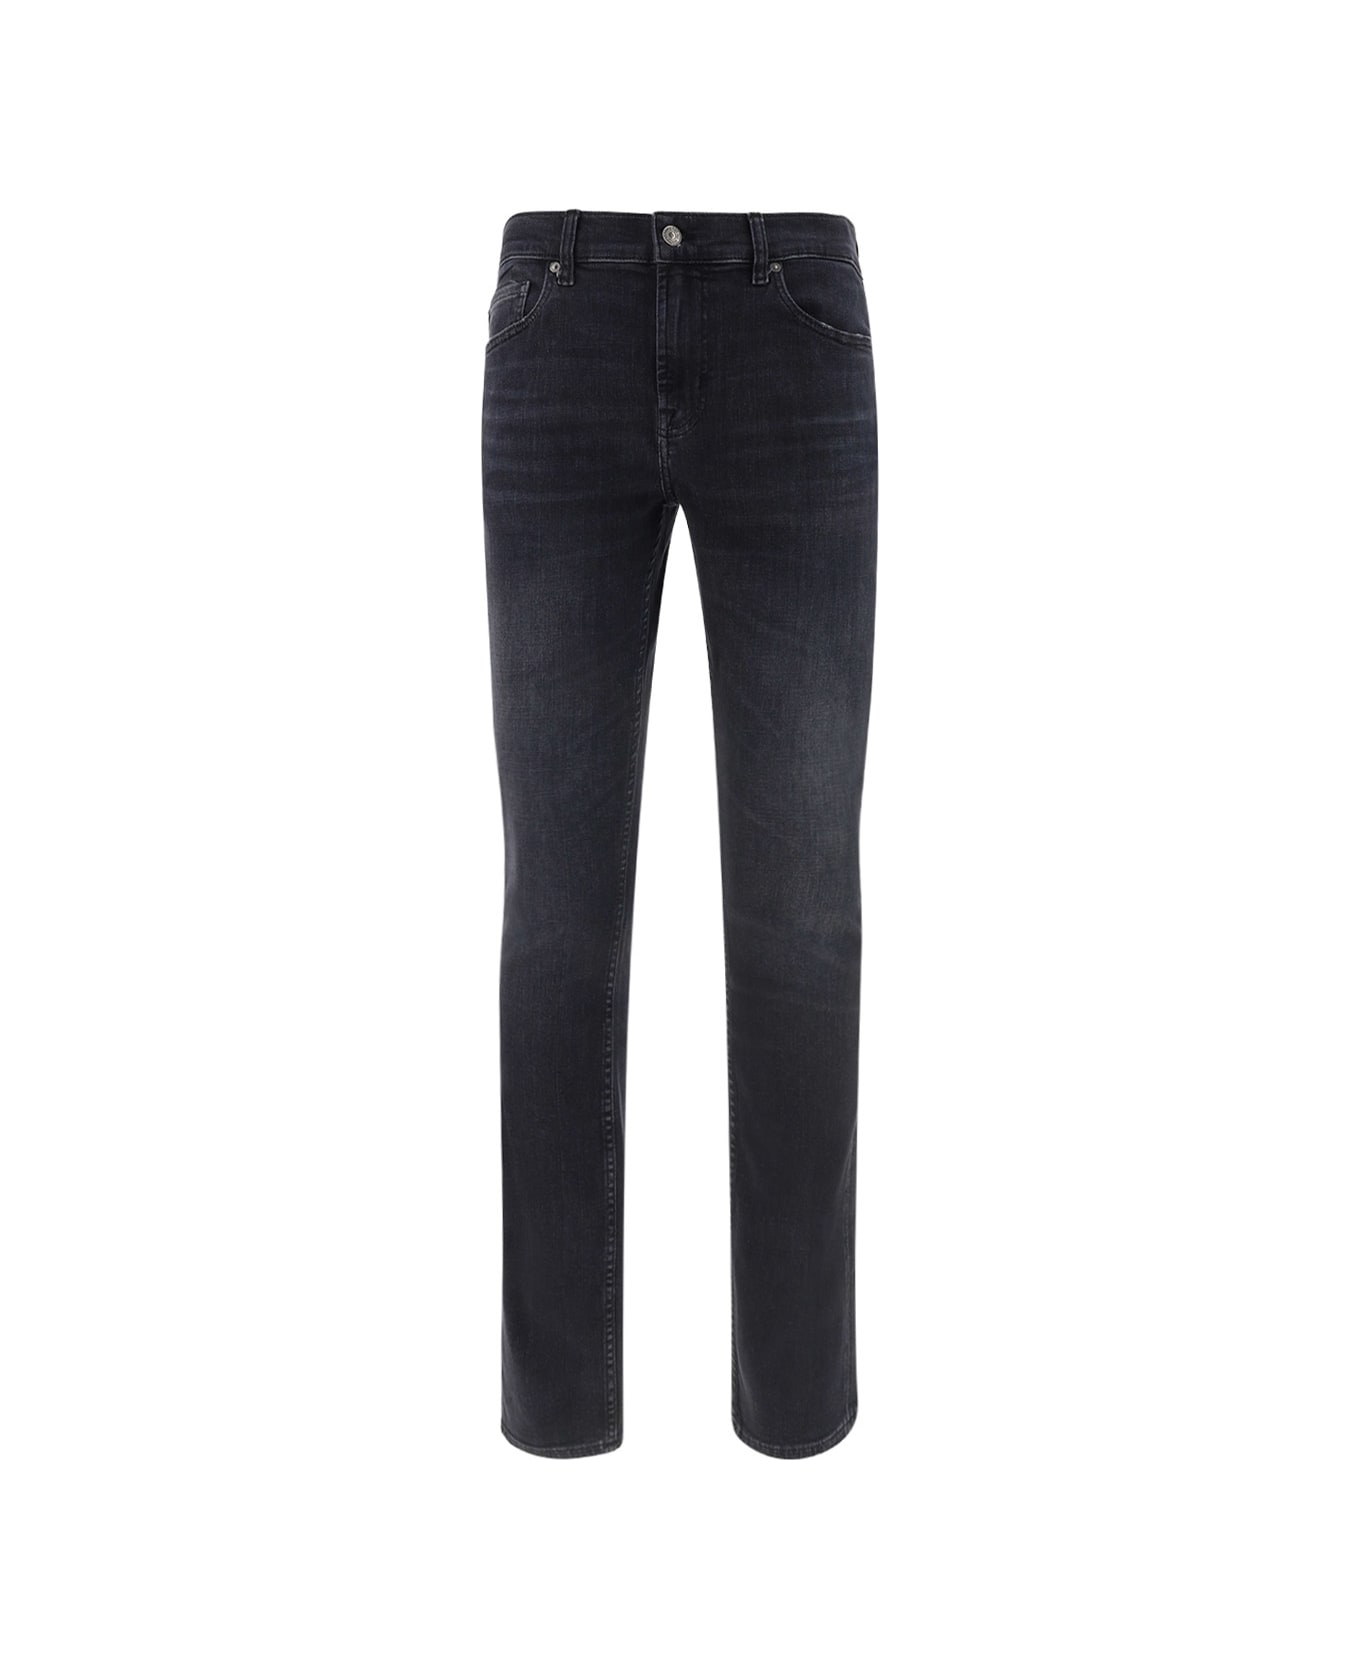 7 For All Mankind Paxytyn Jeans - BLACK